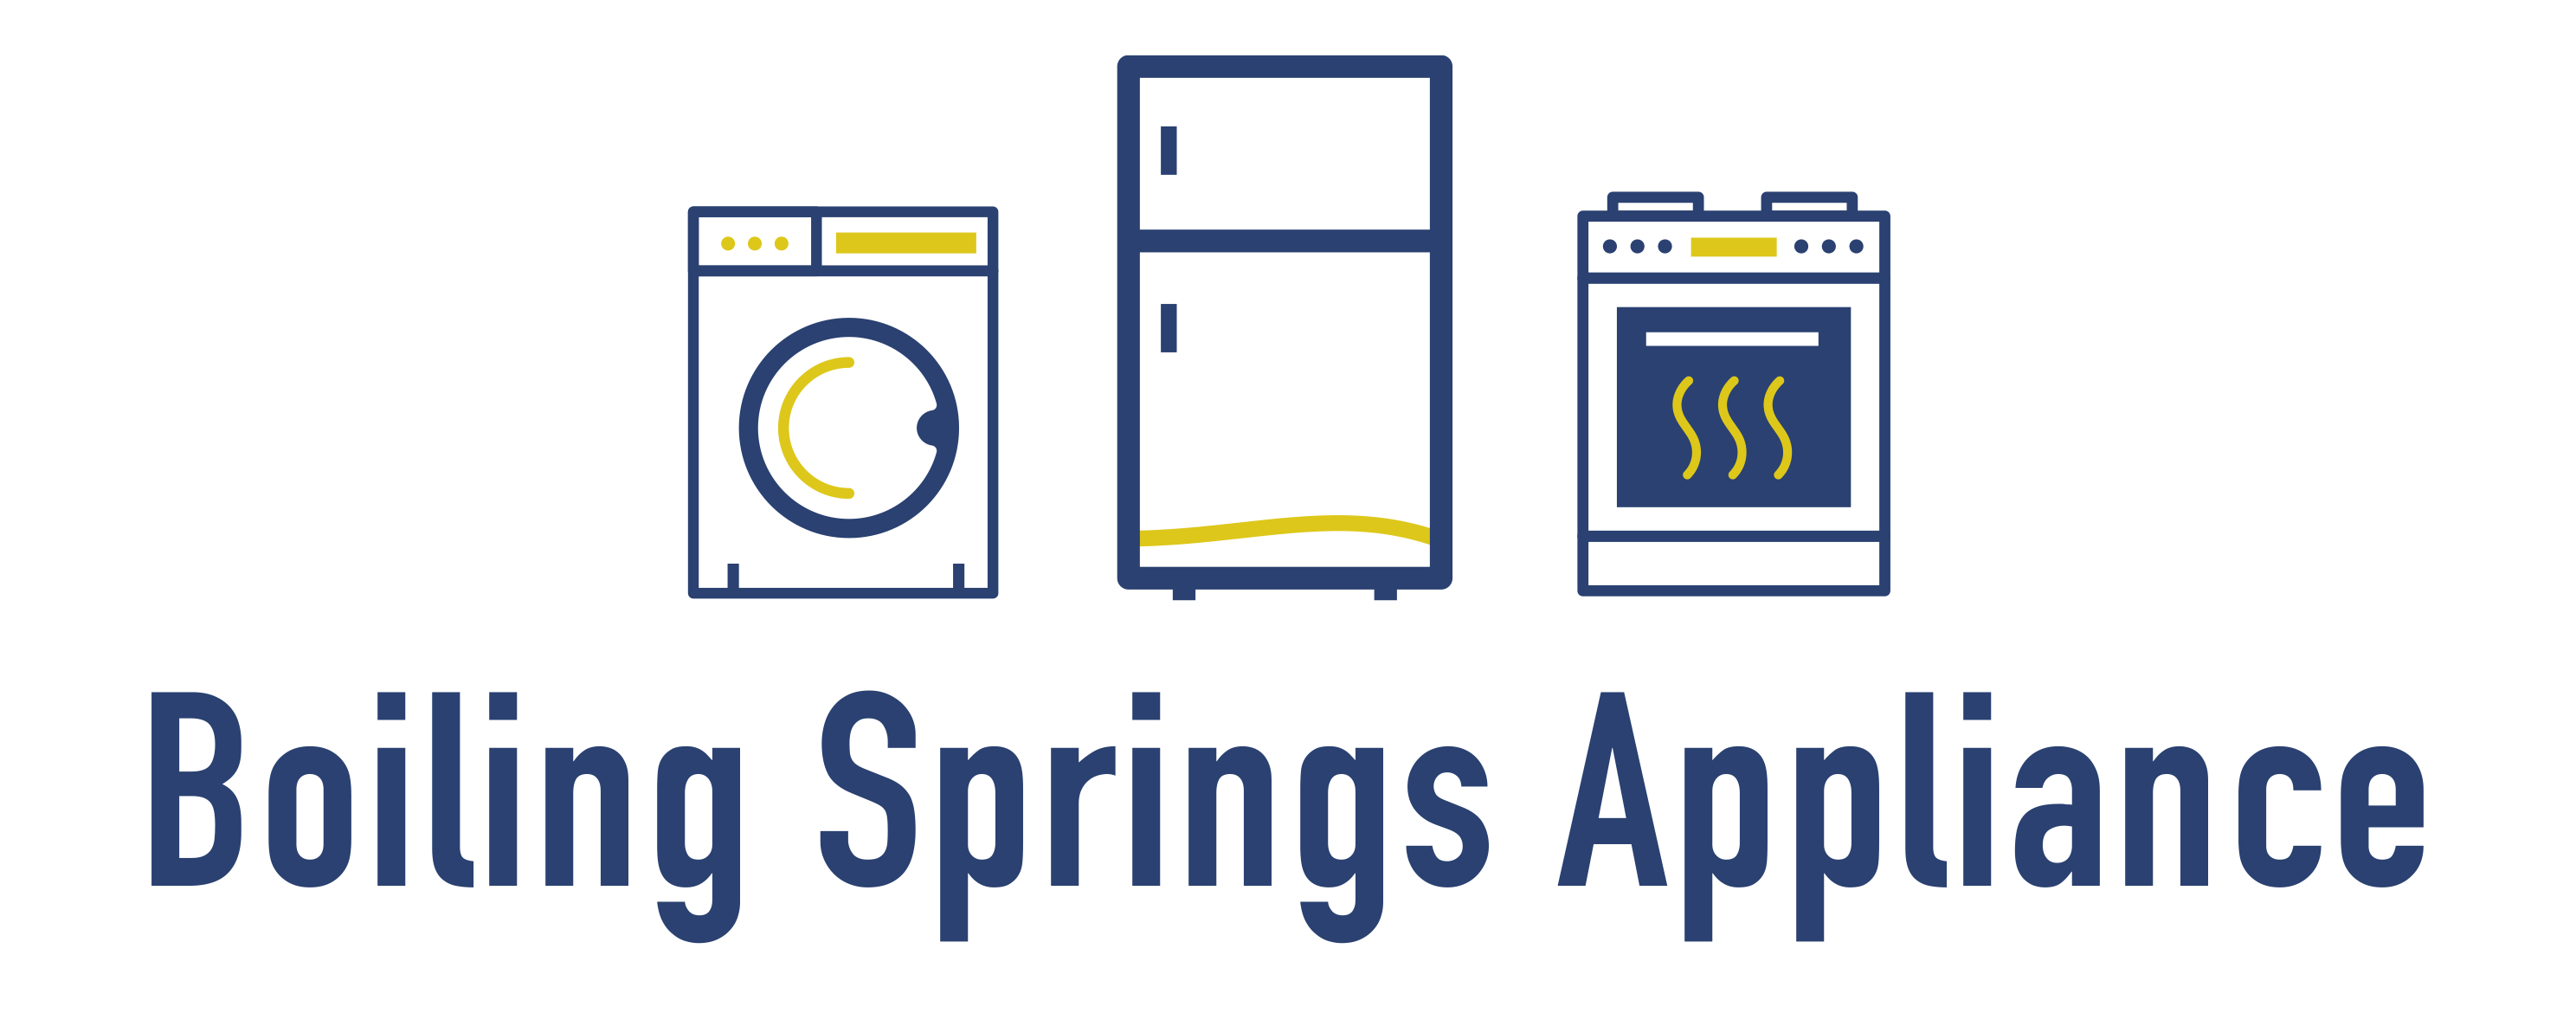 Boiling Springs Appliance logo, link to homepage